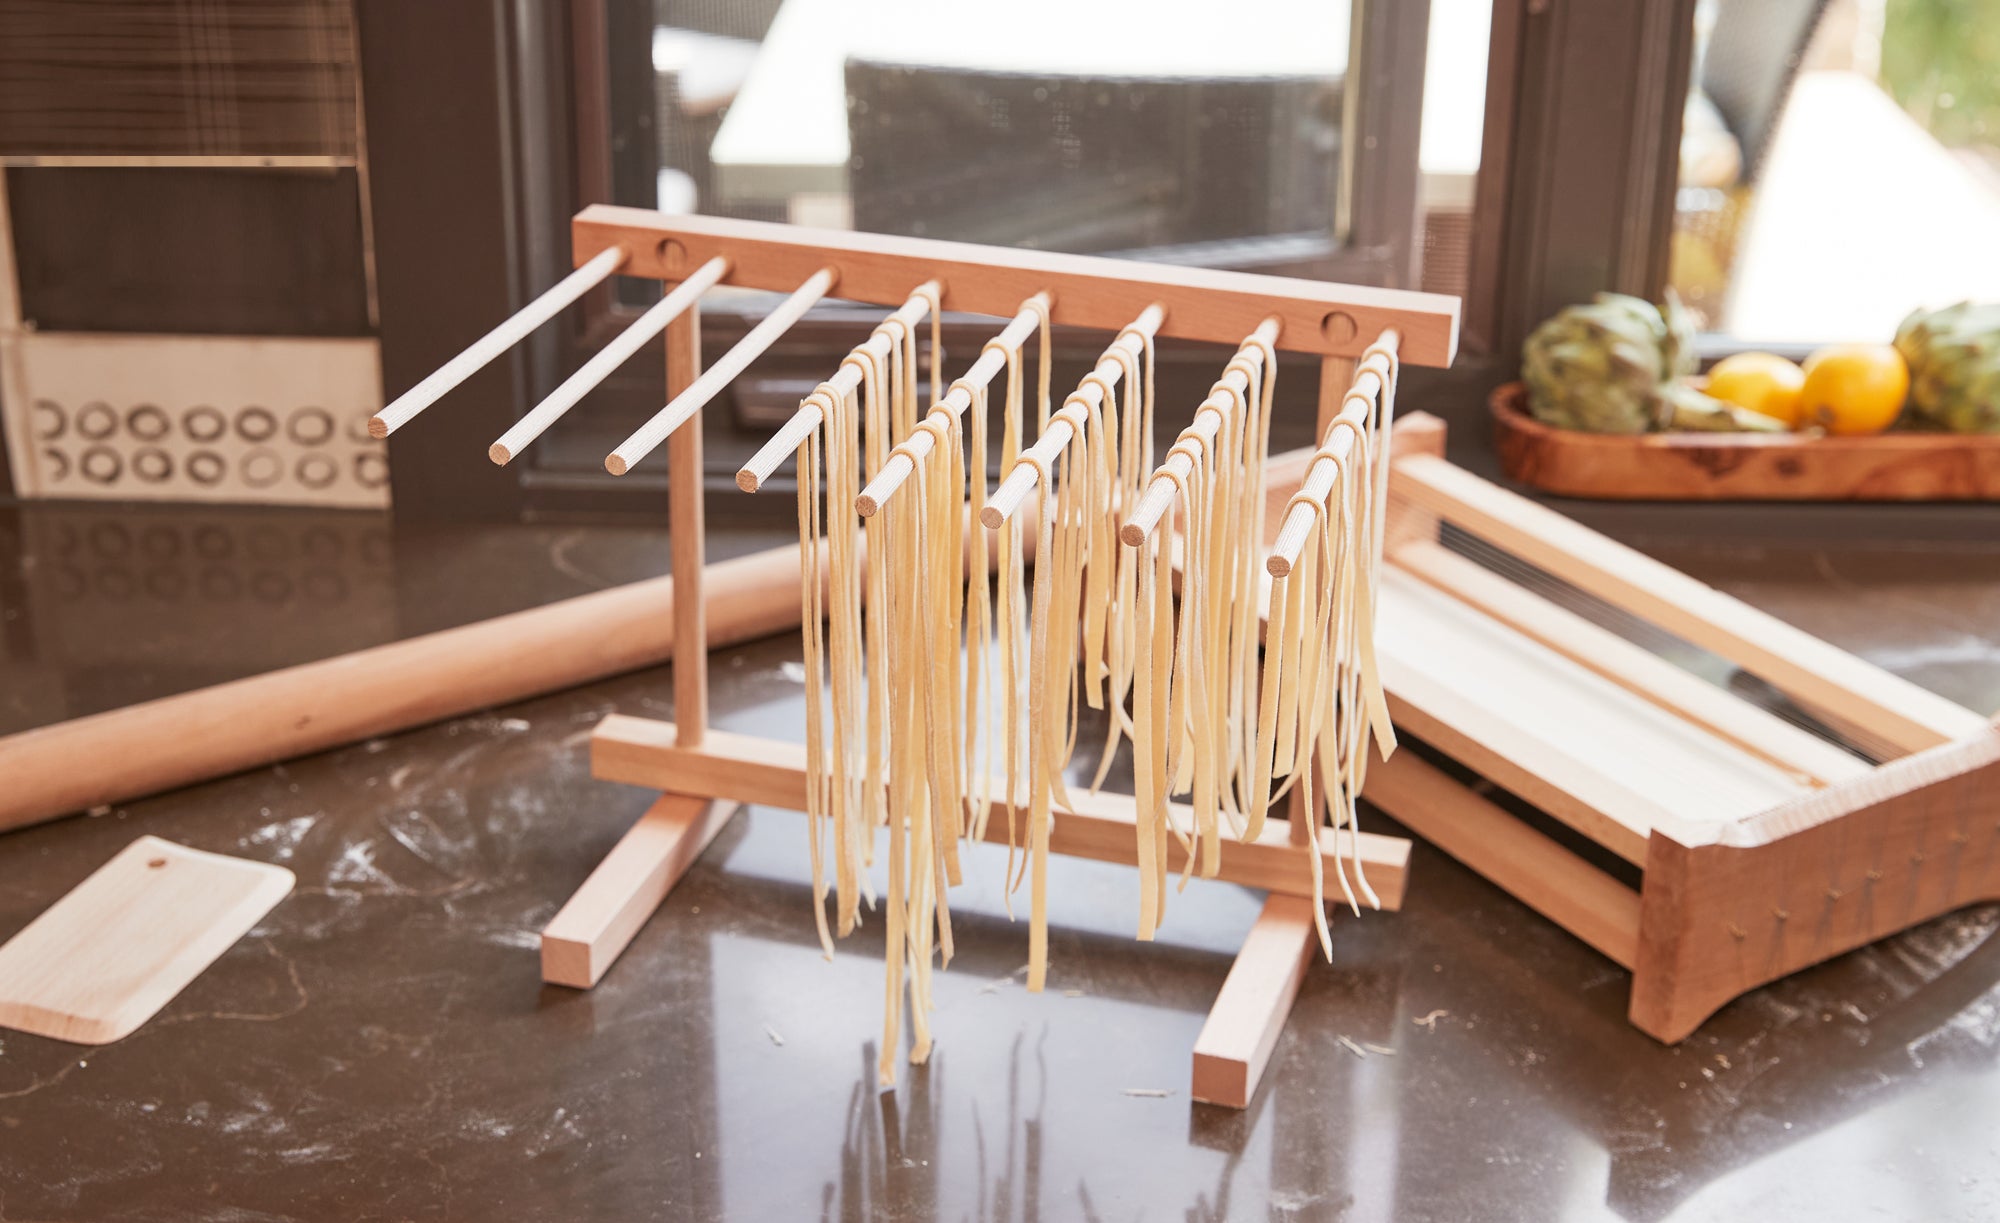 Wooden Pasta Cutters - 12